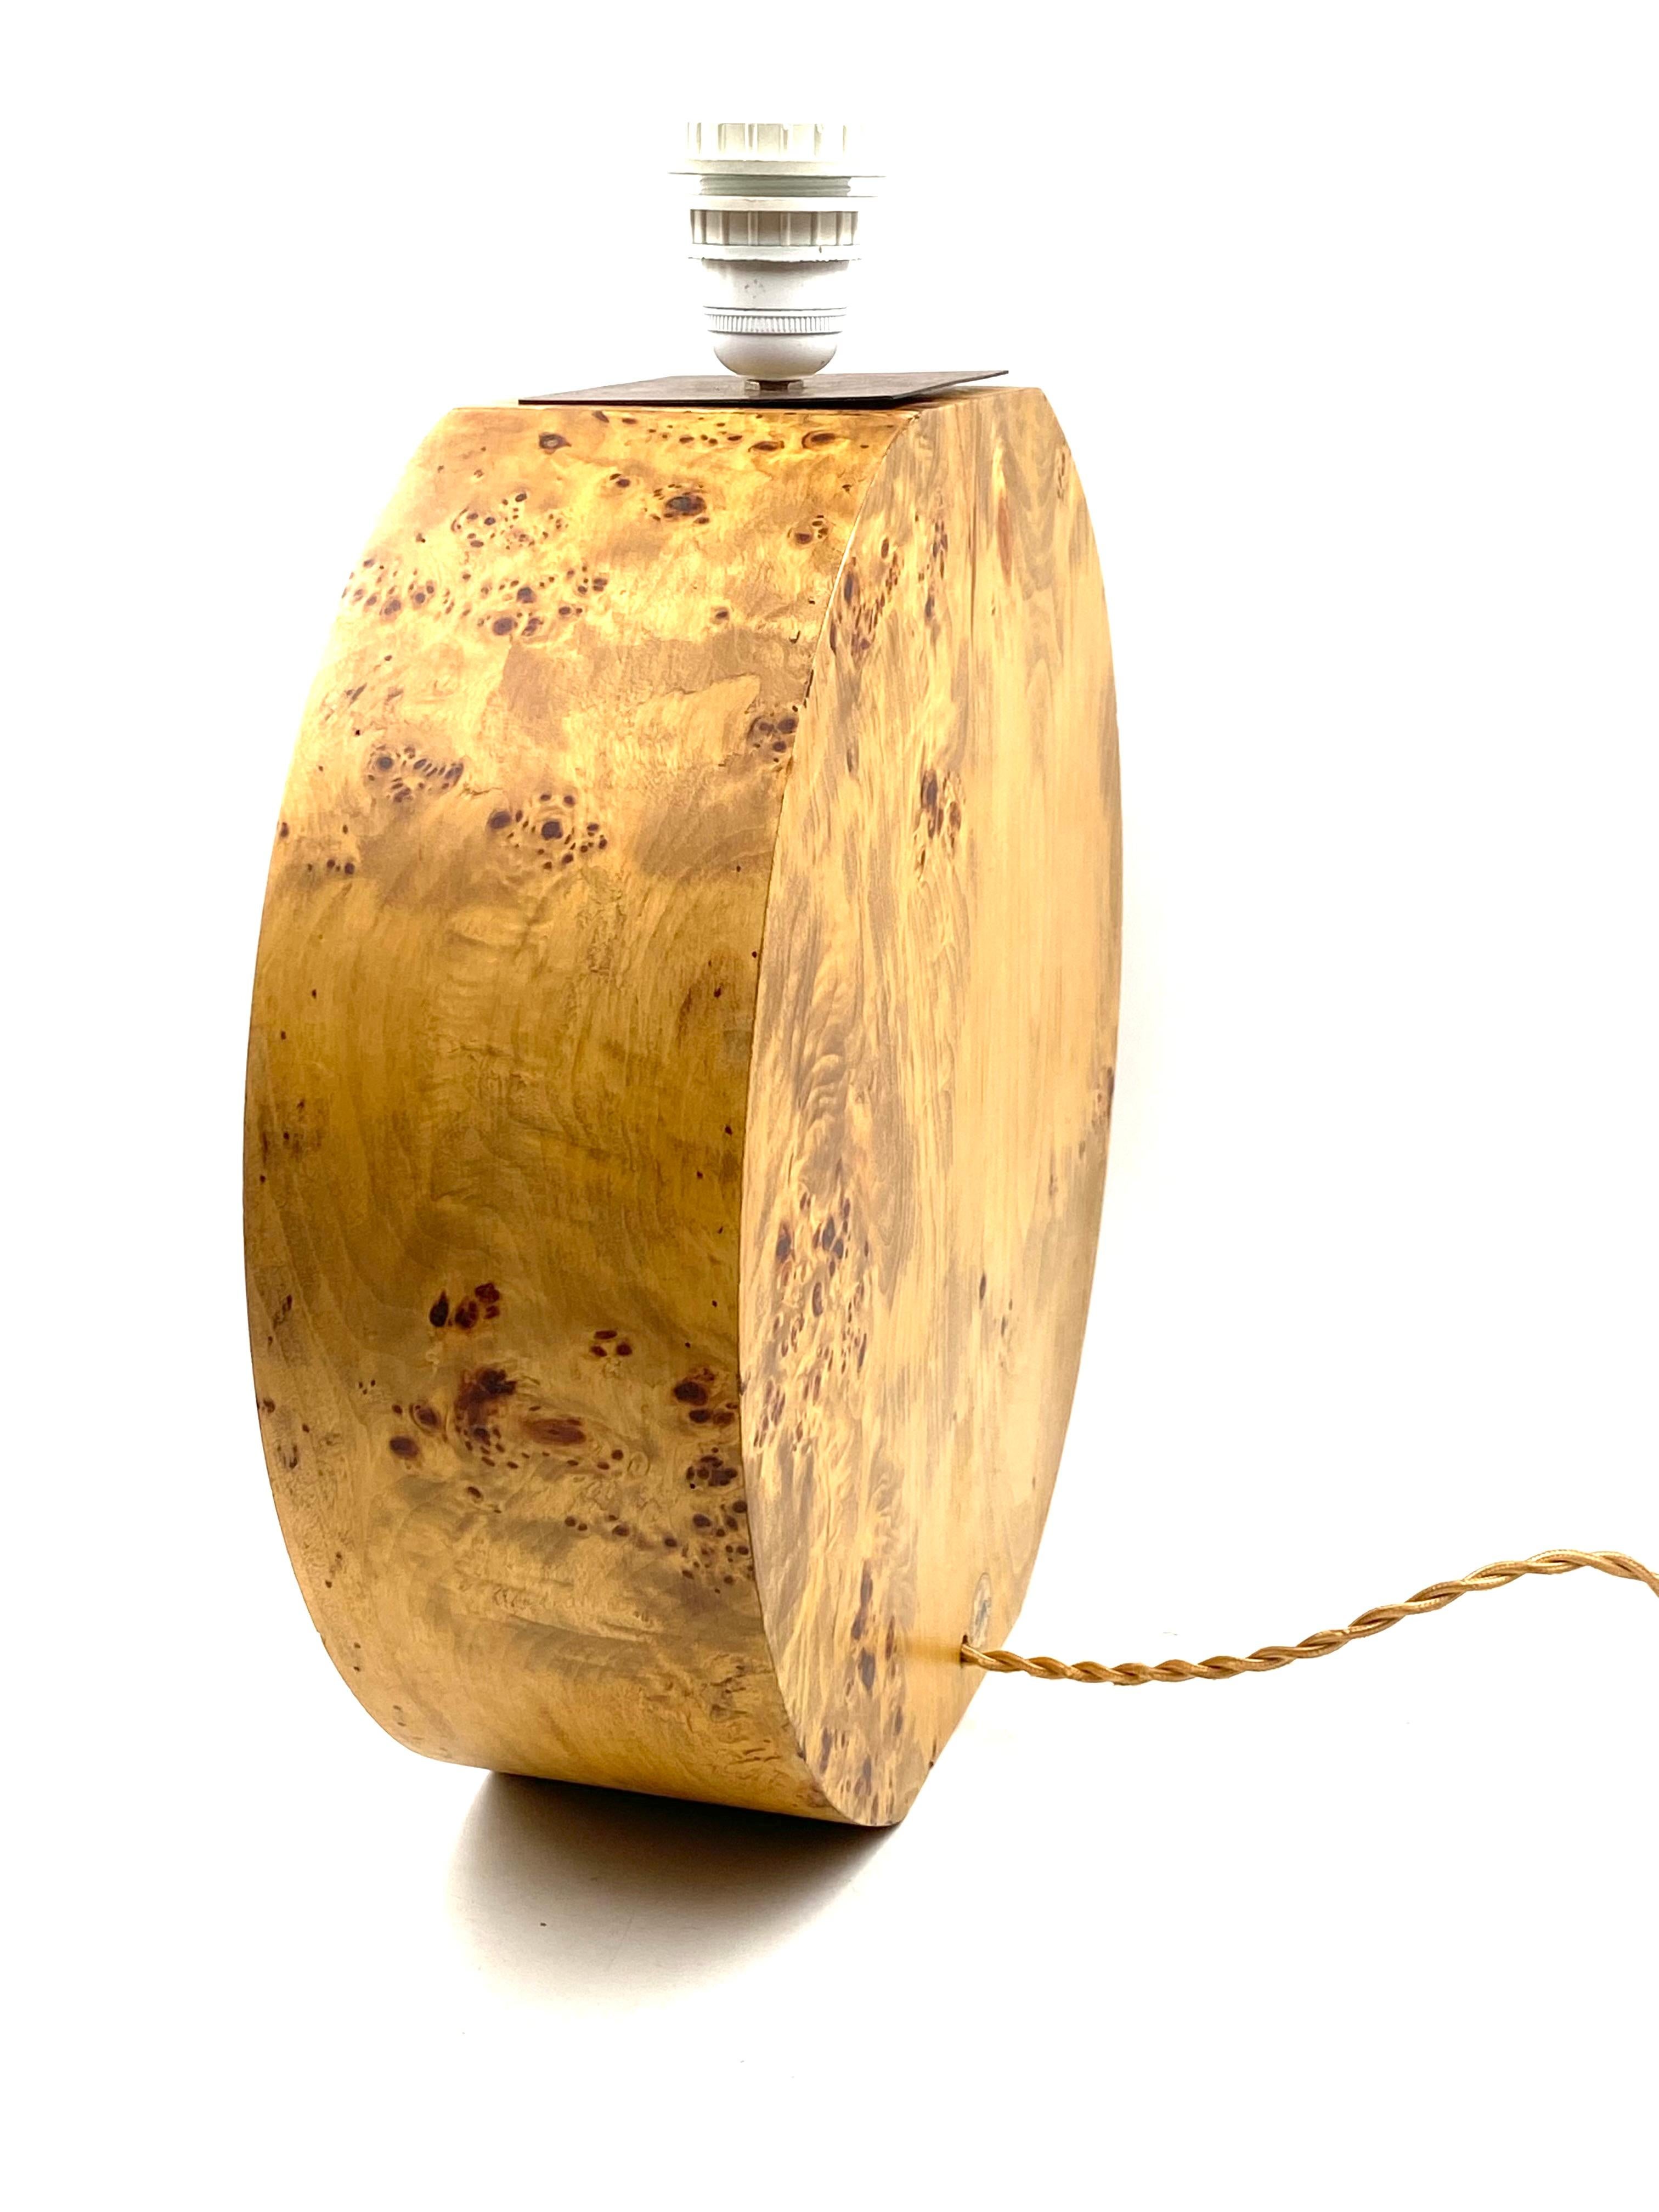 Hollywood Regency Monumental Briar / Burl Wood Table Lamp Base, Italy, 1970s For Sale 5